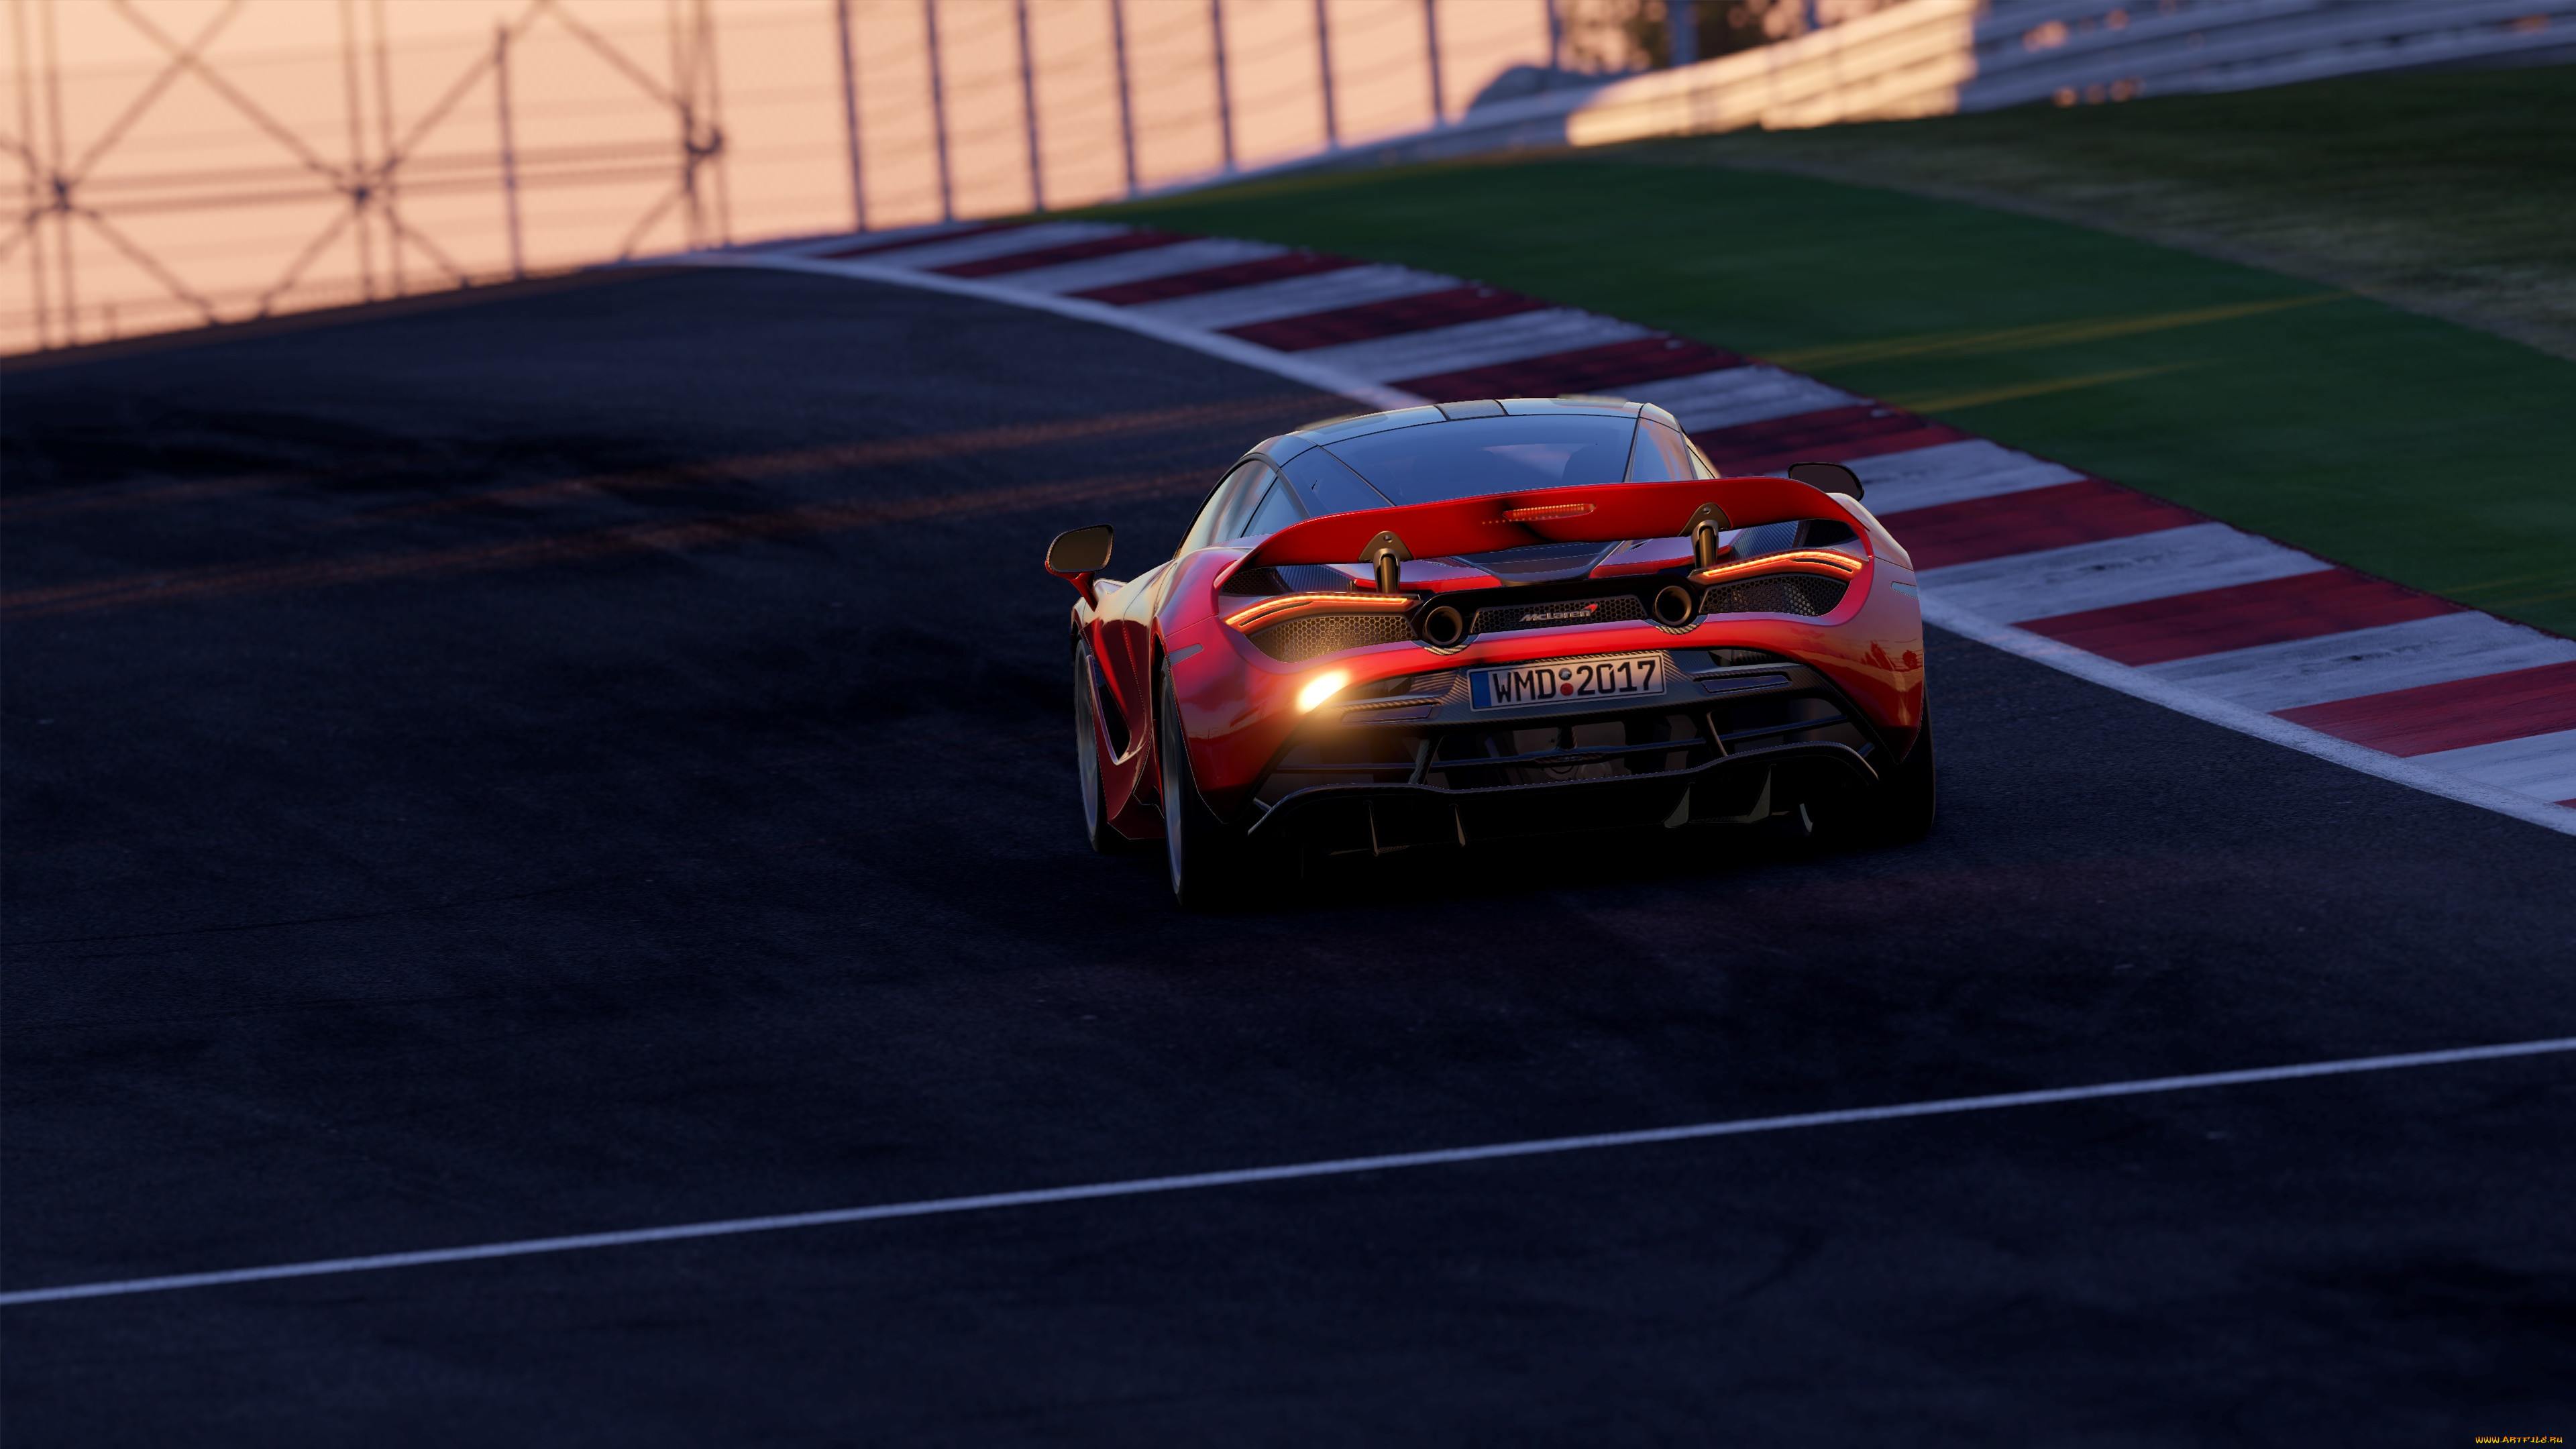  , project cars 2, project, cars, 2